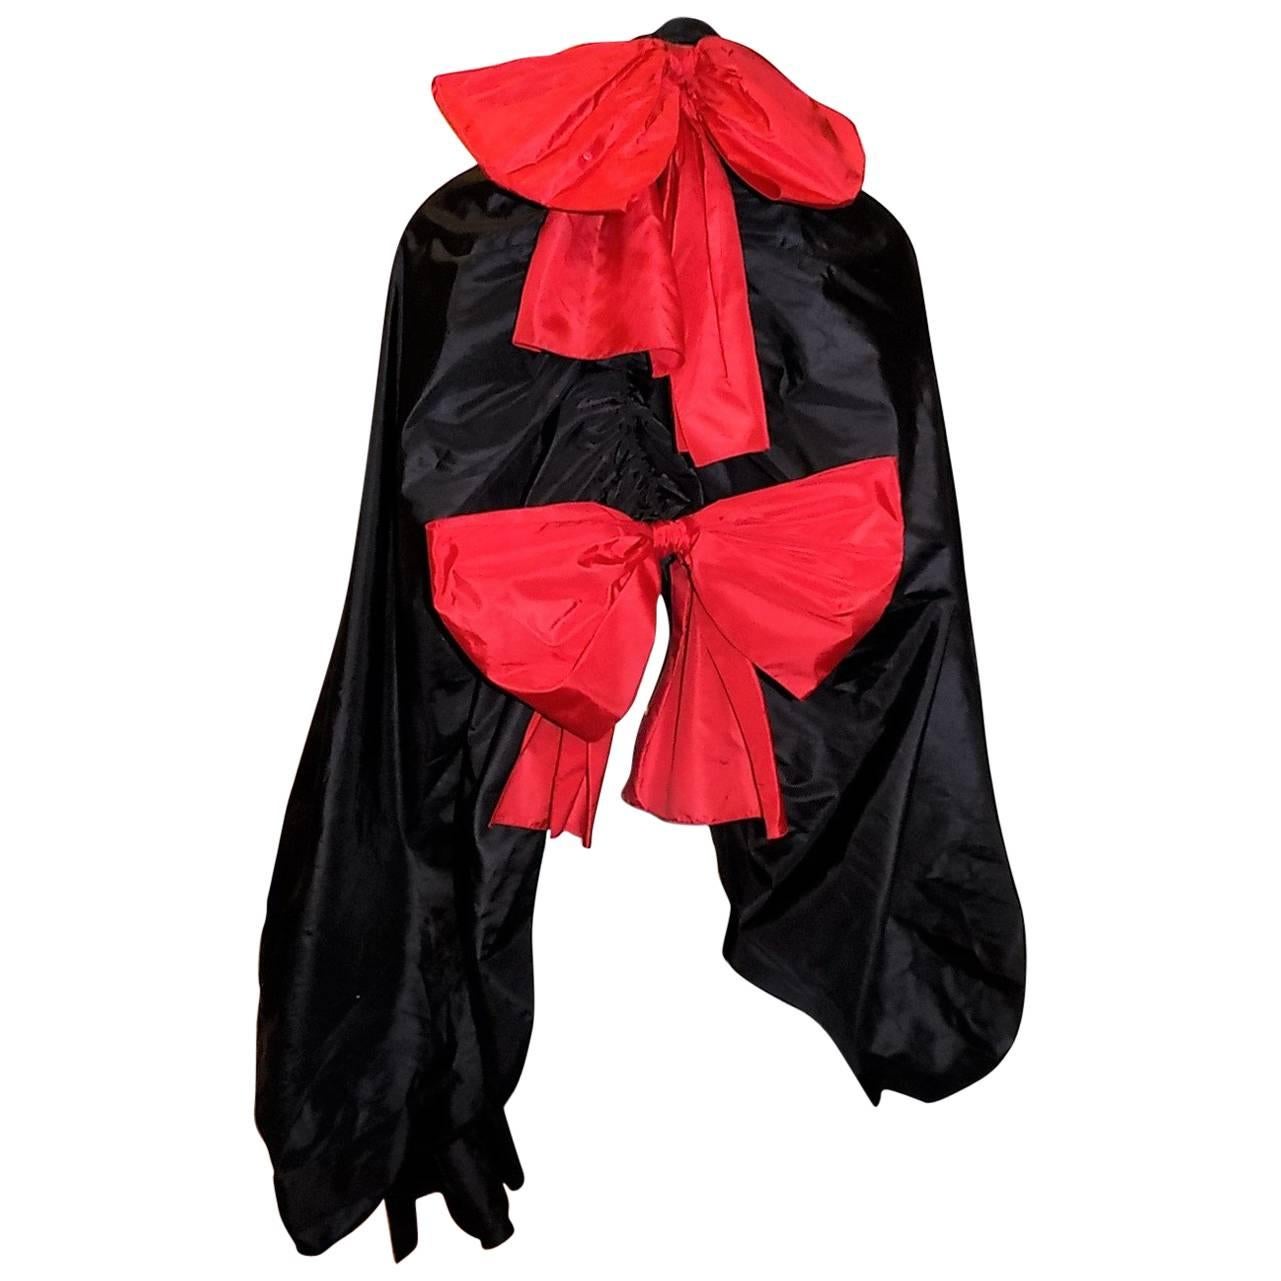 Christian Dior Vintage oversized  evening shawl wrap with large bows For Sale